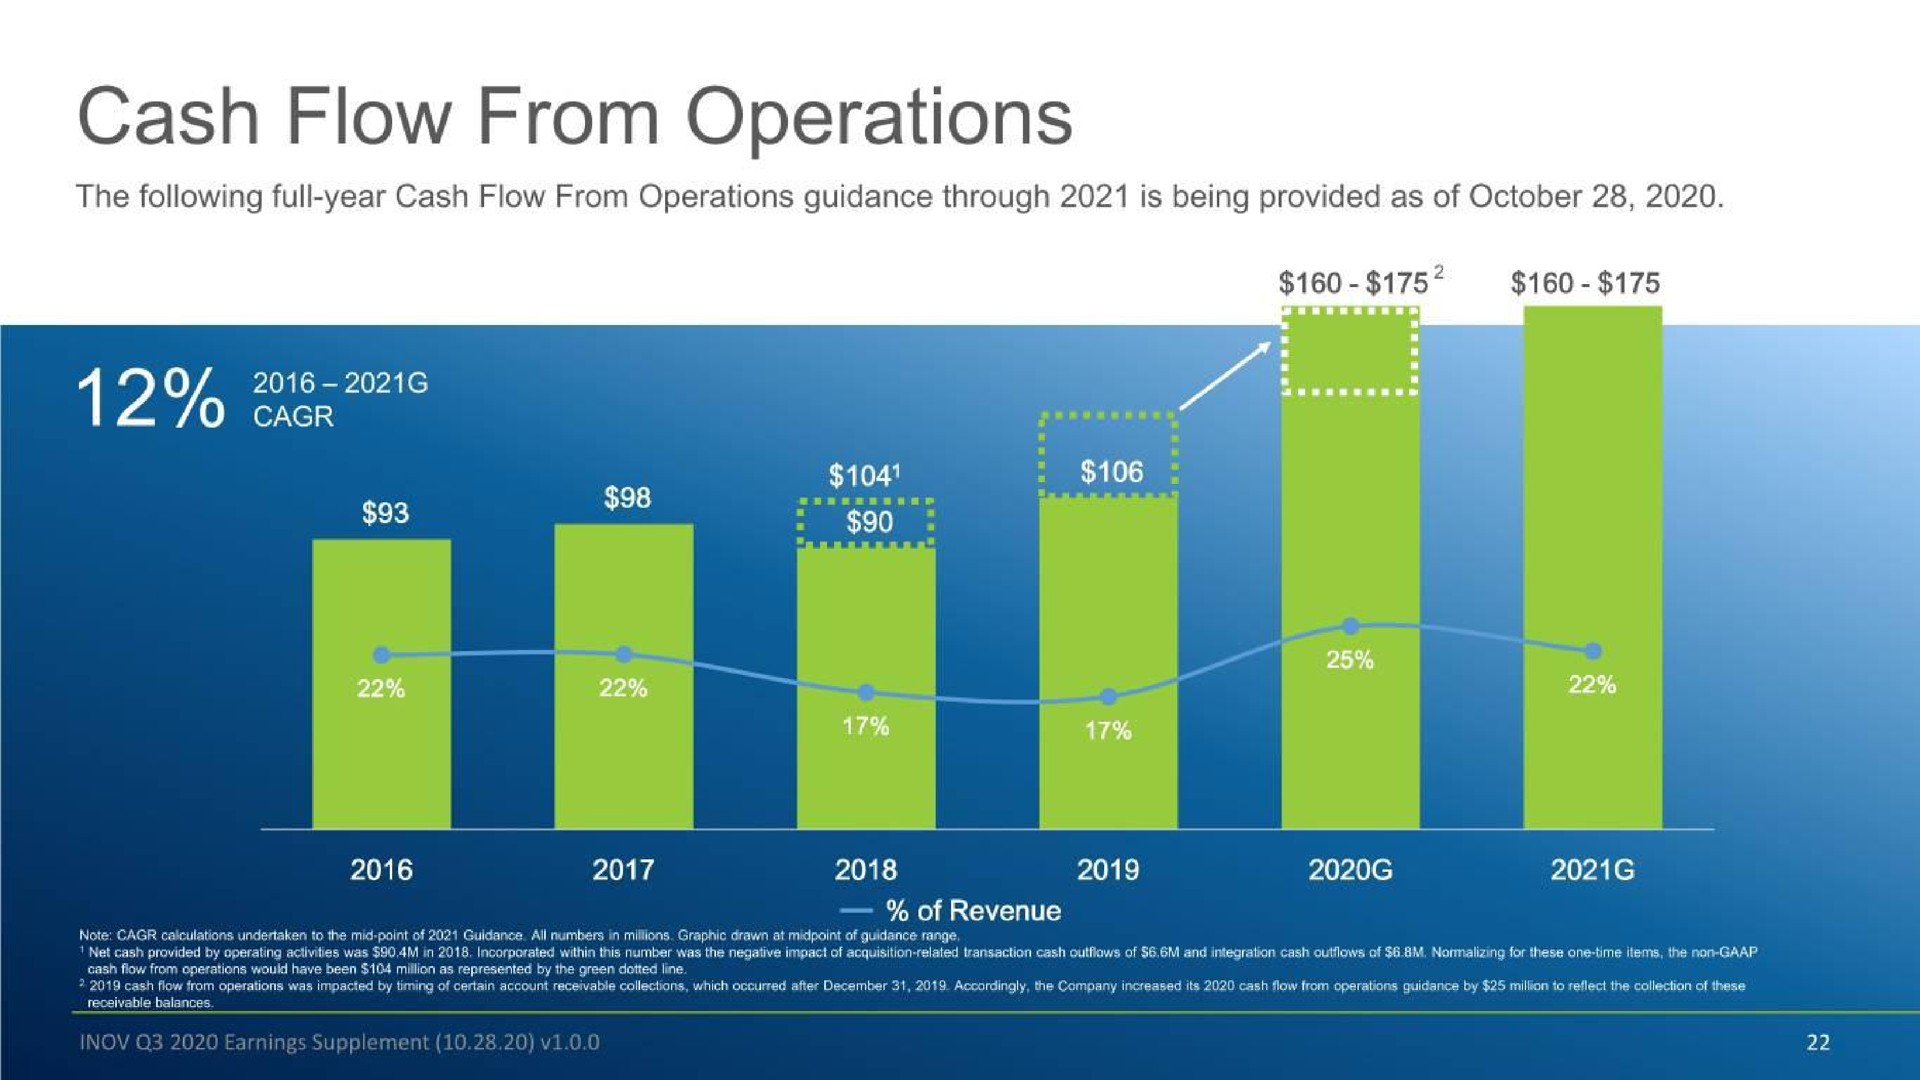 cash flow from operations he aes | Inovalon